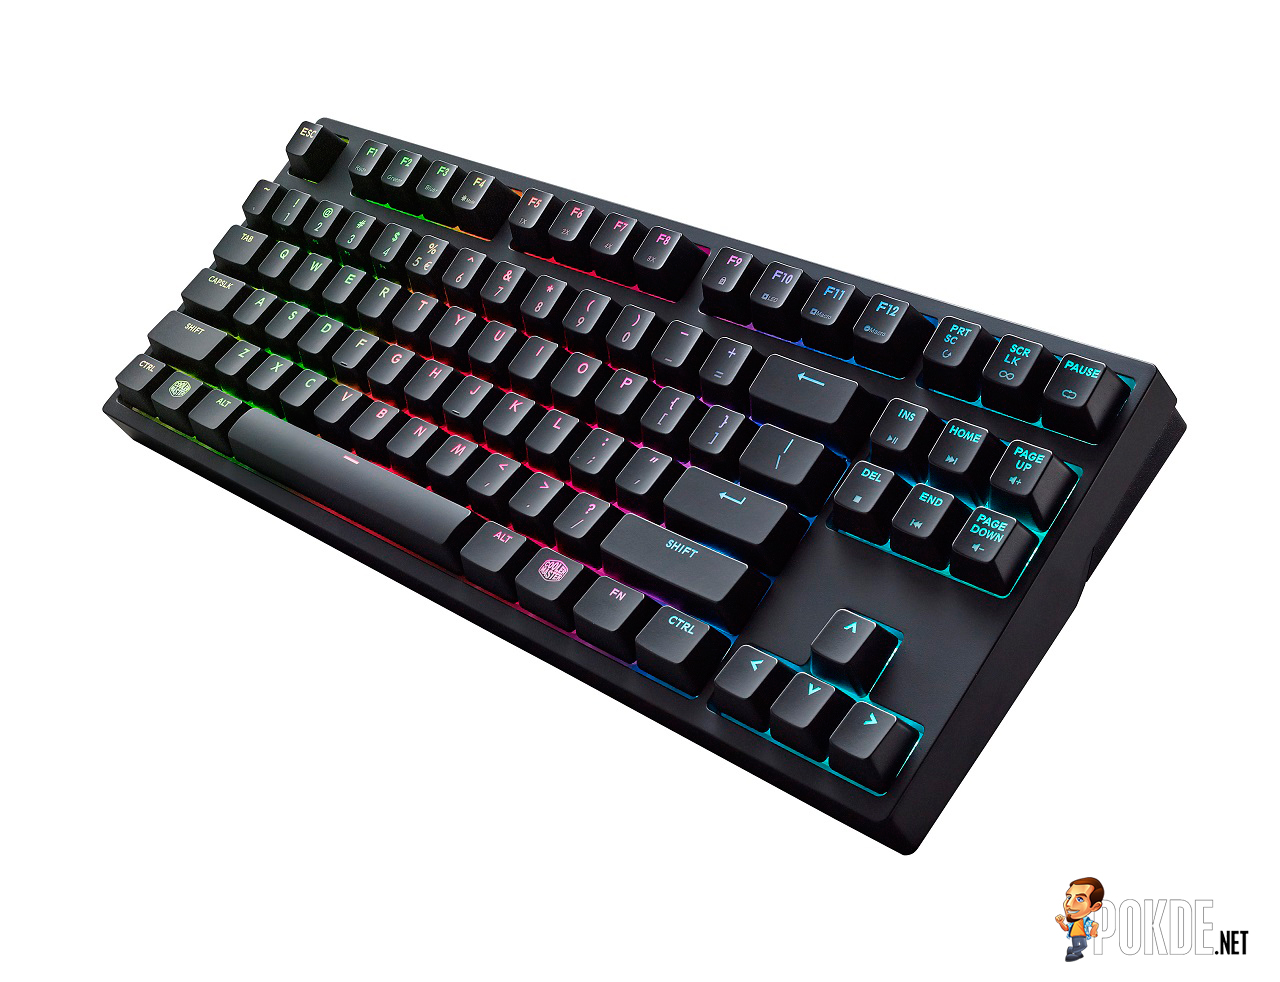 Cooler Master Announces RGB Keyboards 33